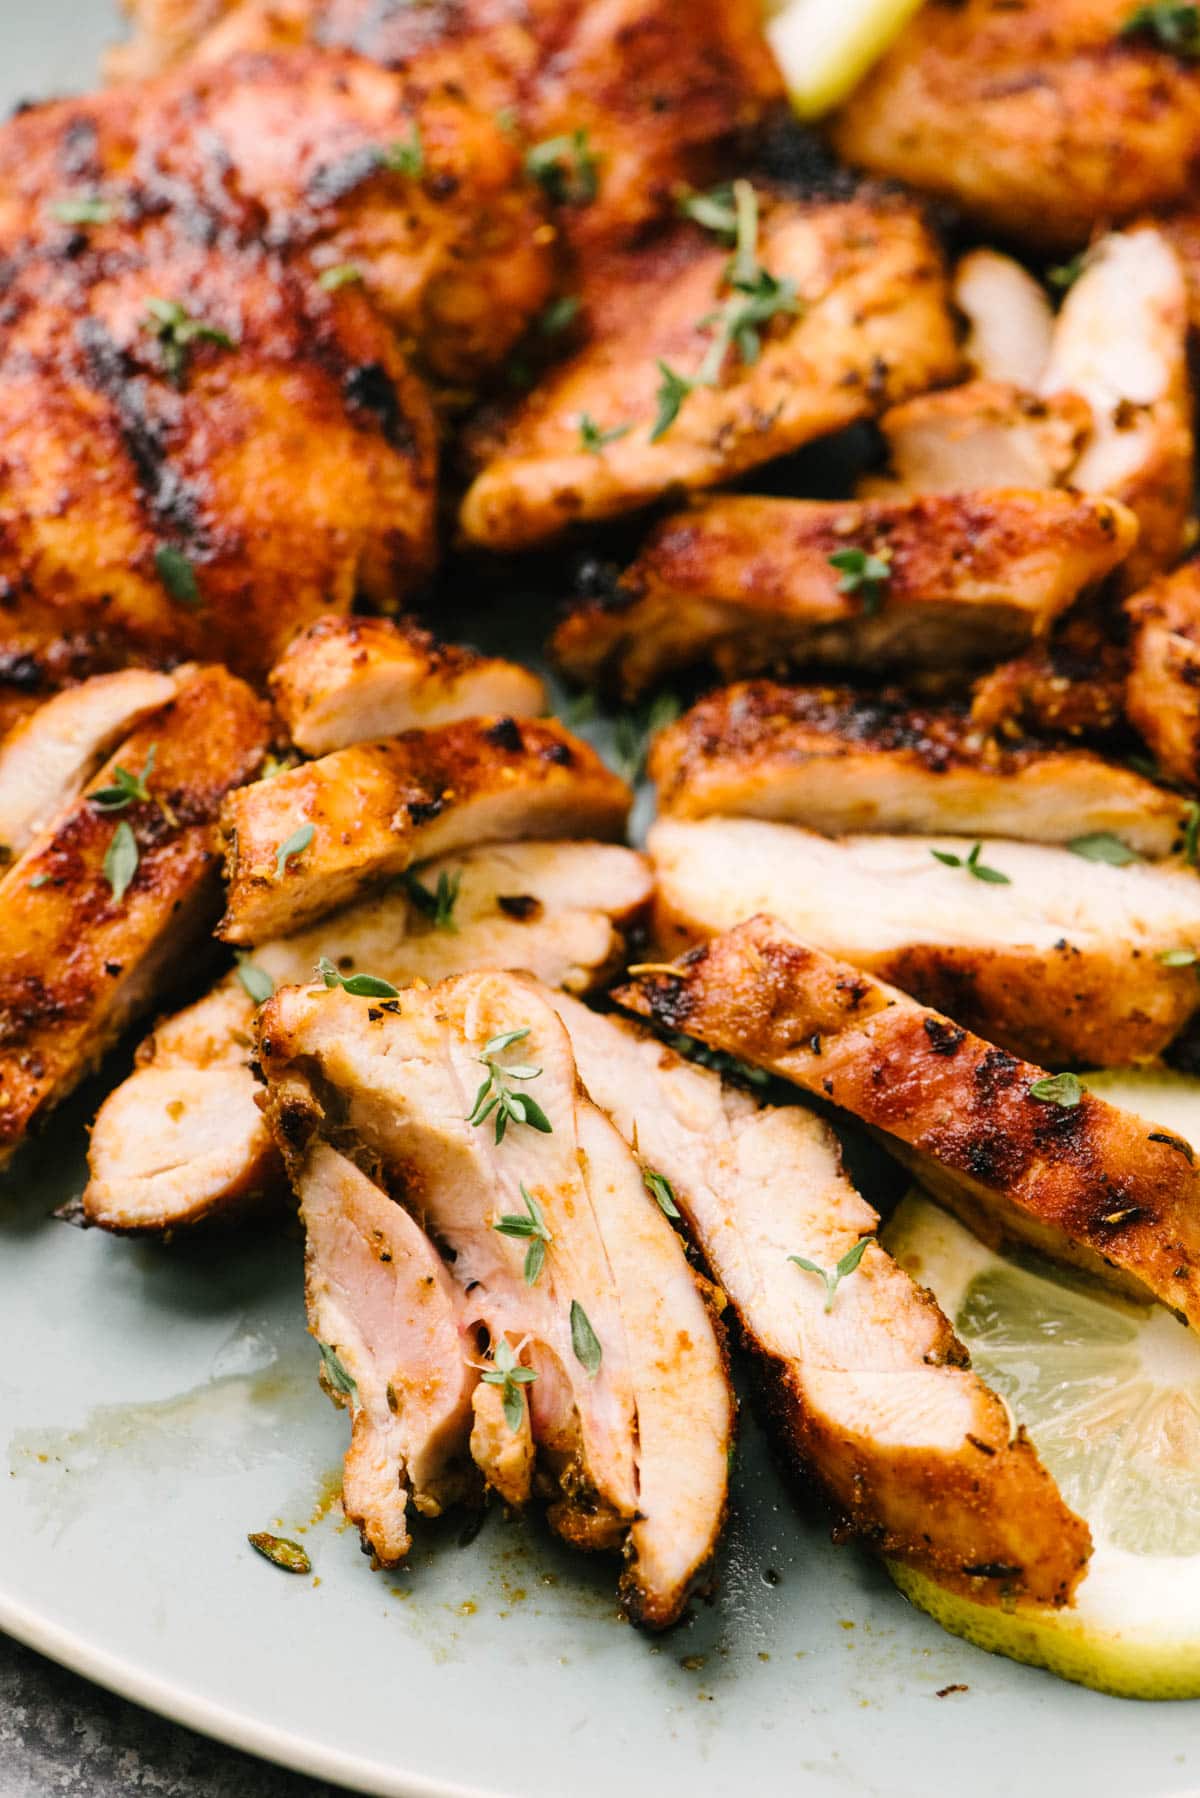 Side view, thinly sliced pieces of grilled chicken thigh on a light blue plate, garnished with fresh thyme and lemon slices.